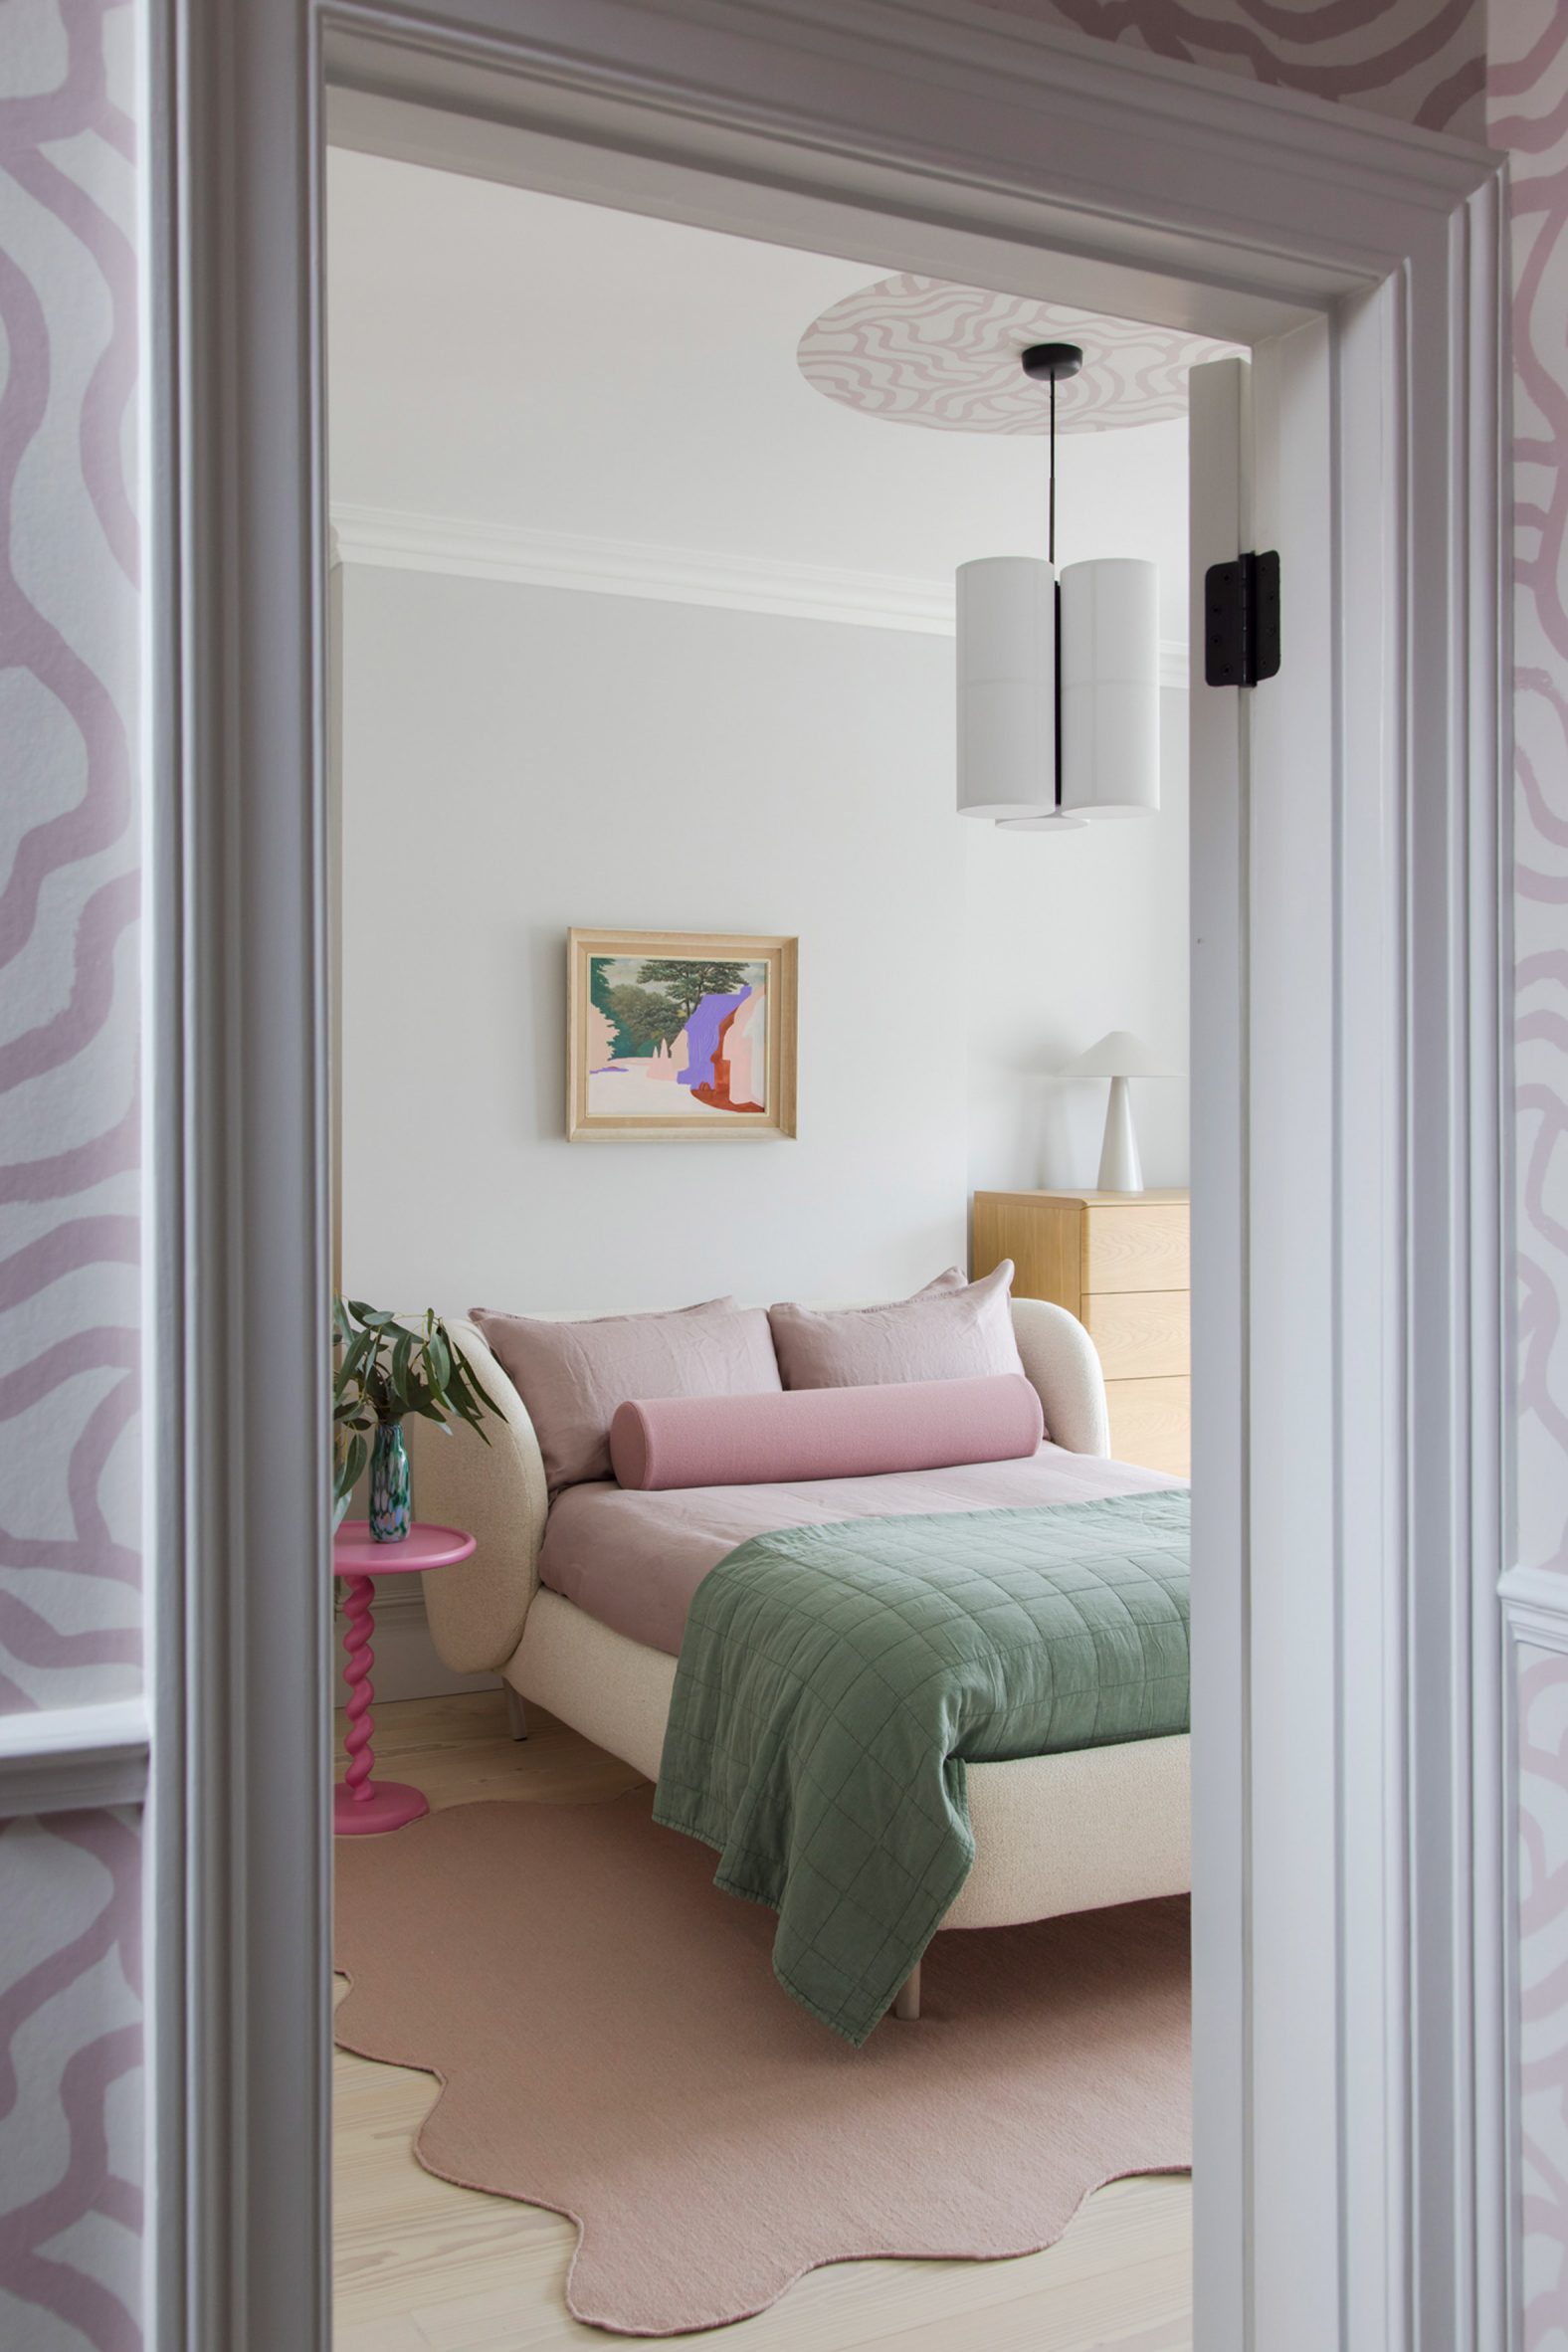 Bedroom of house in London by 2LG